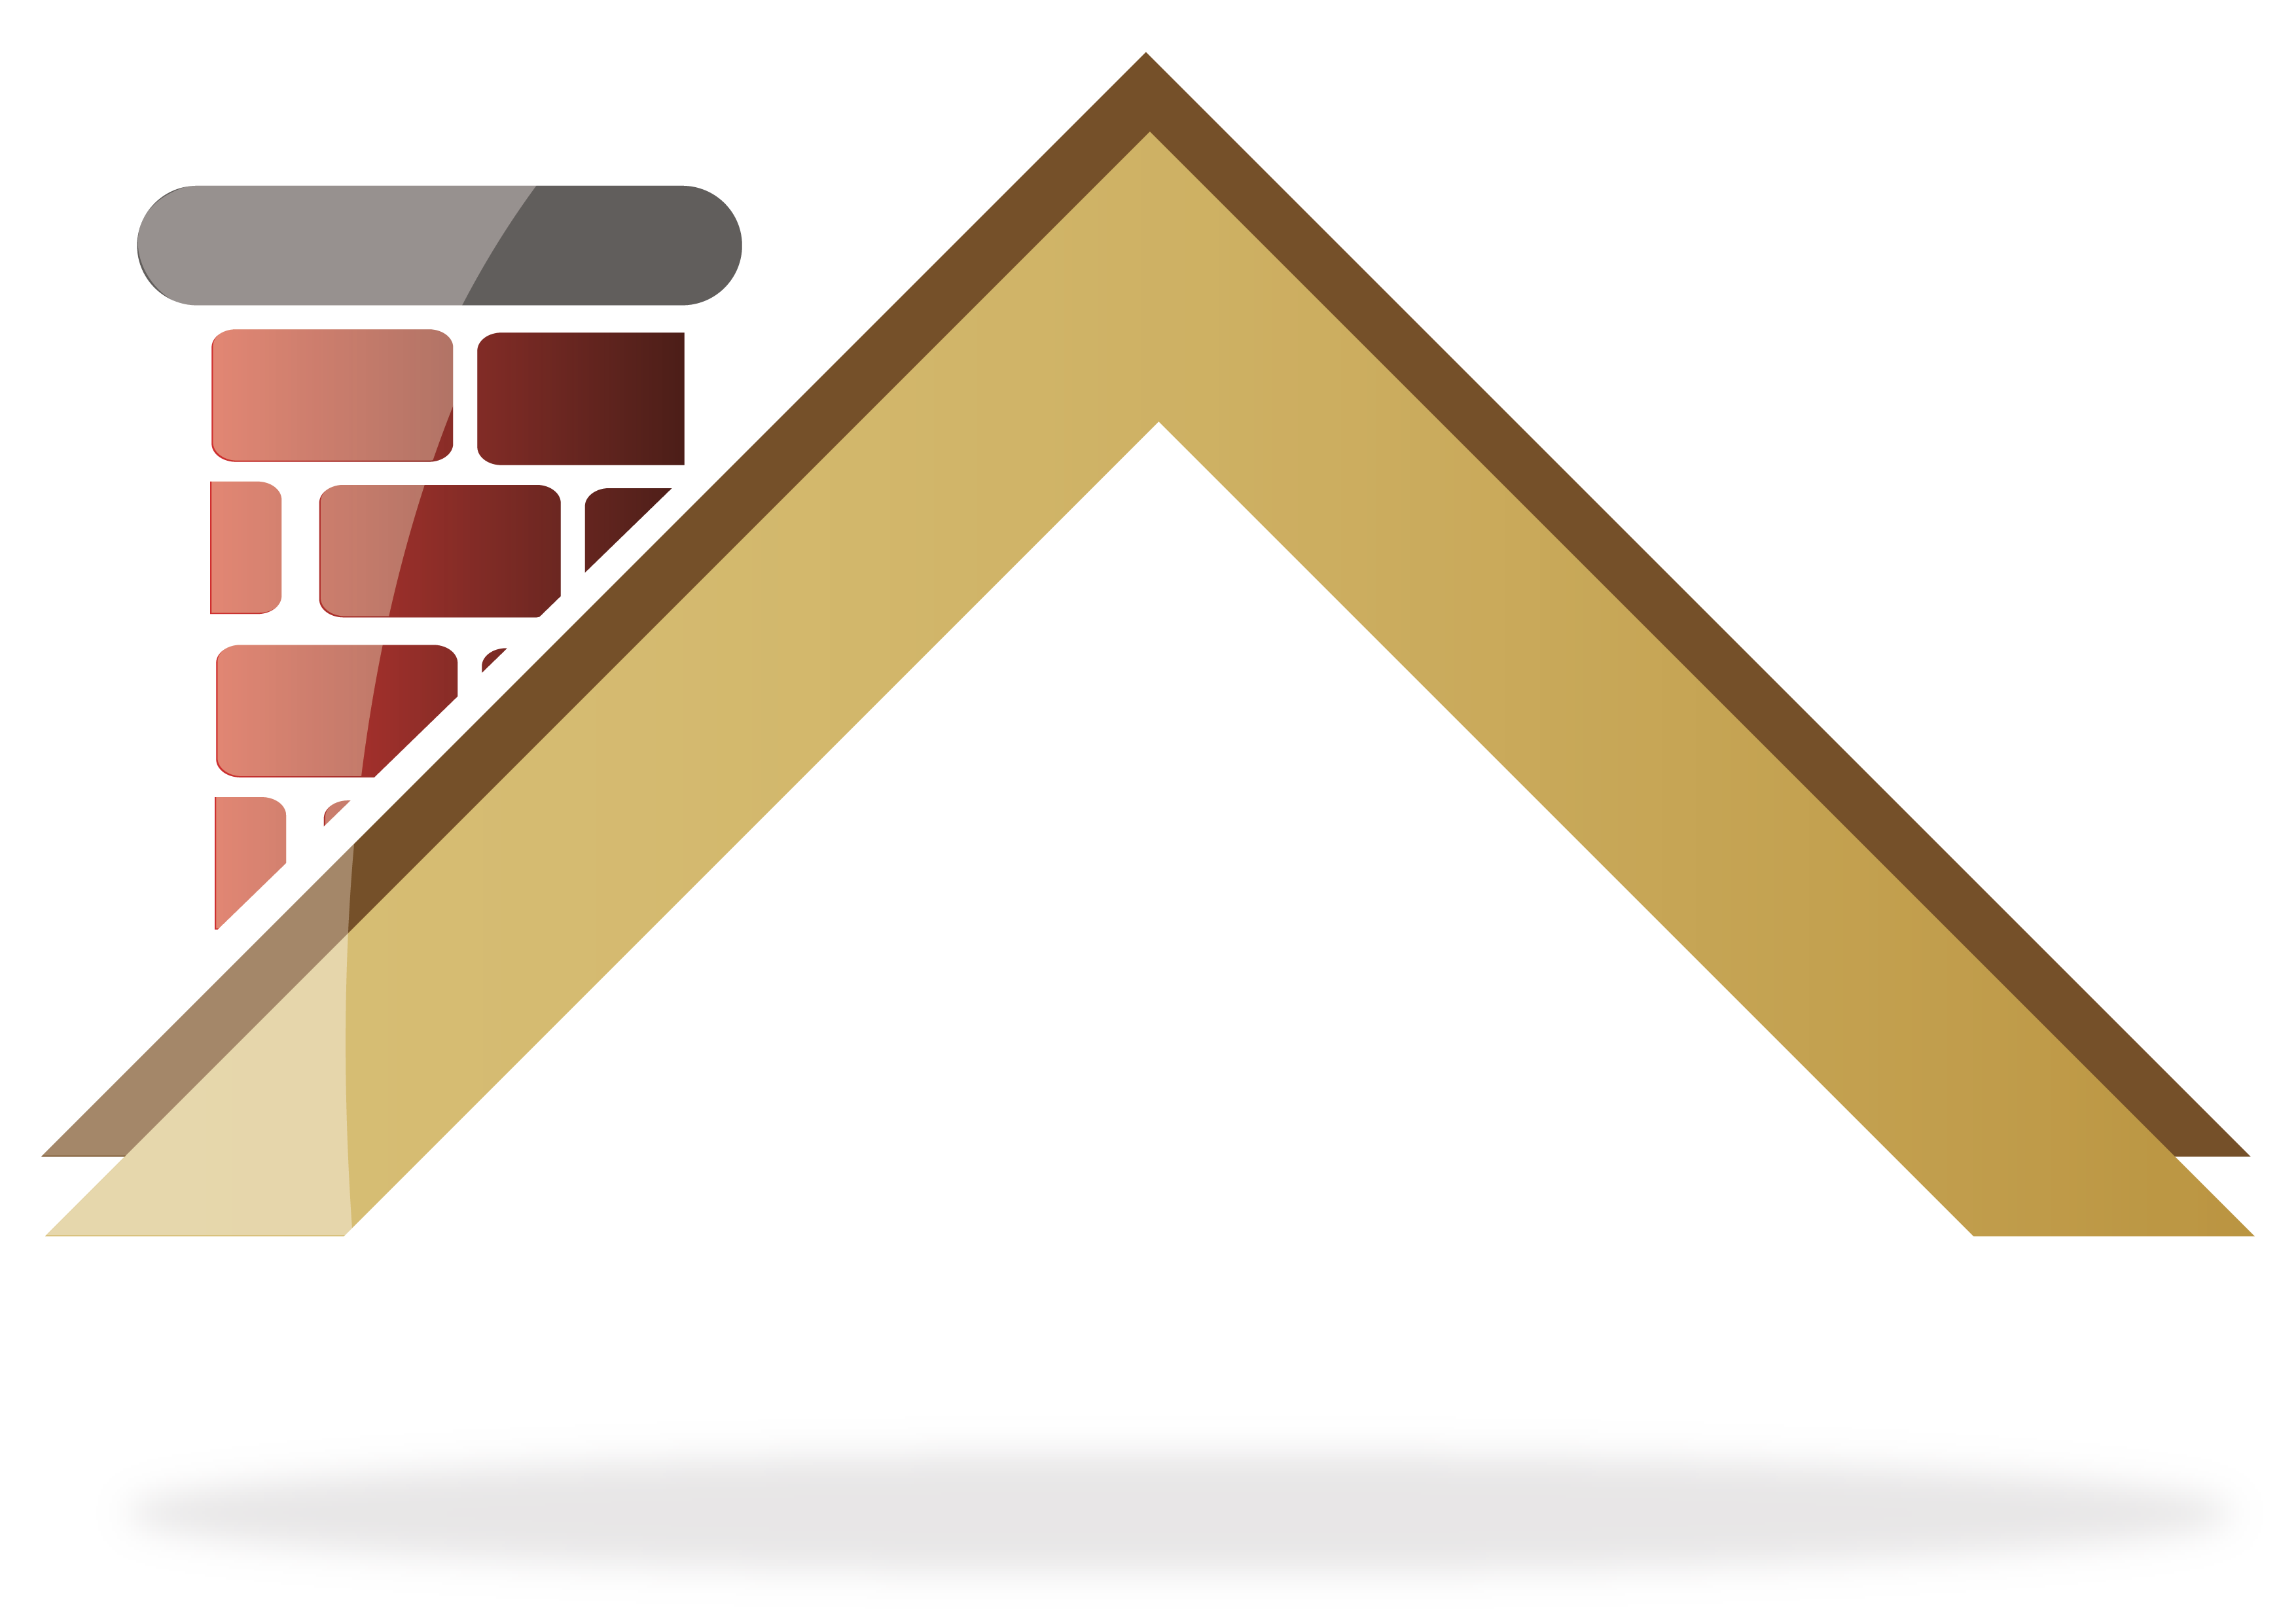 Marketing archives the roofer. Gun clipart roofing